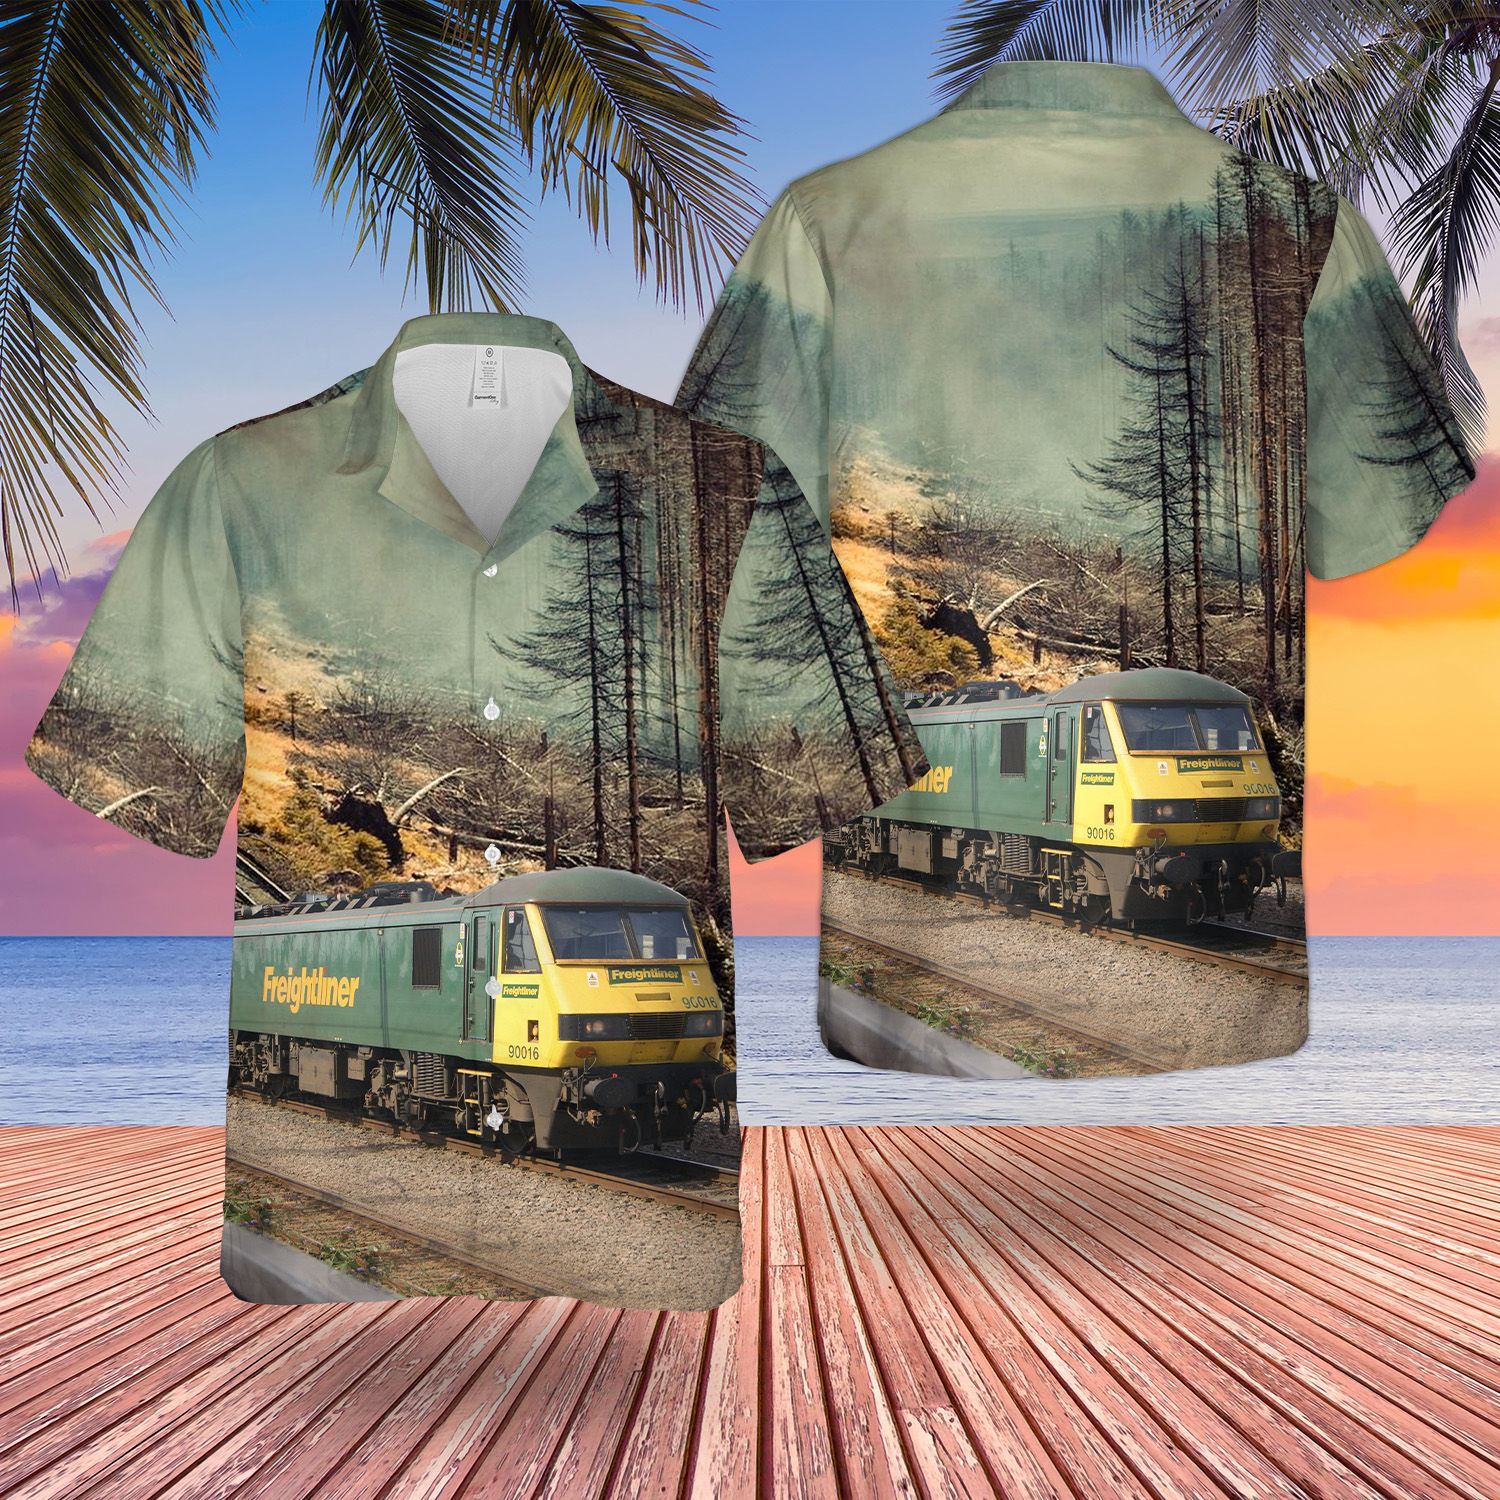 HOT Freightliner Class 90 Locomotive Train All Over Print Tropical Shirt2